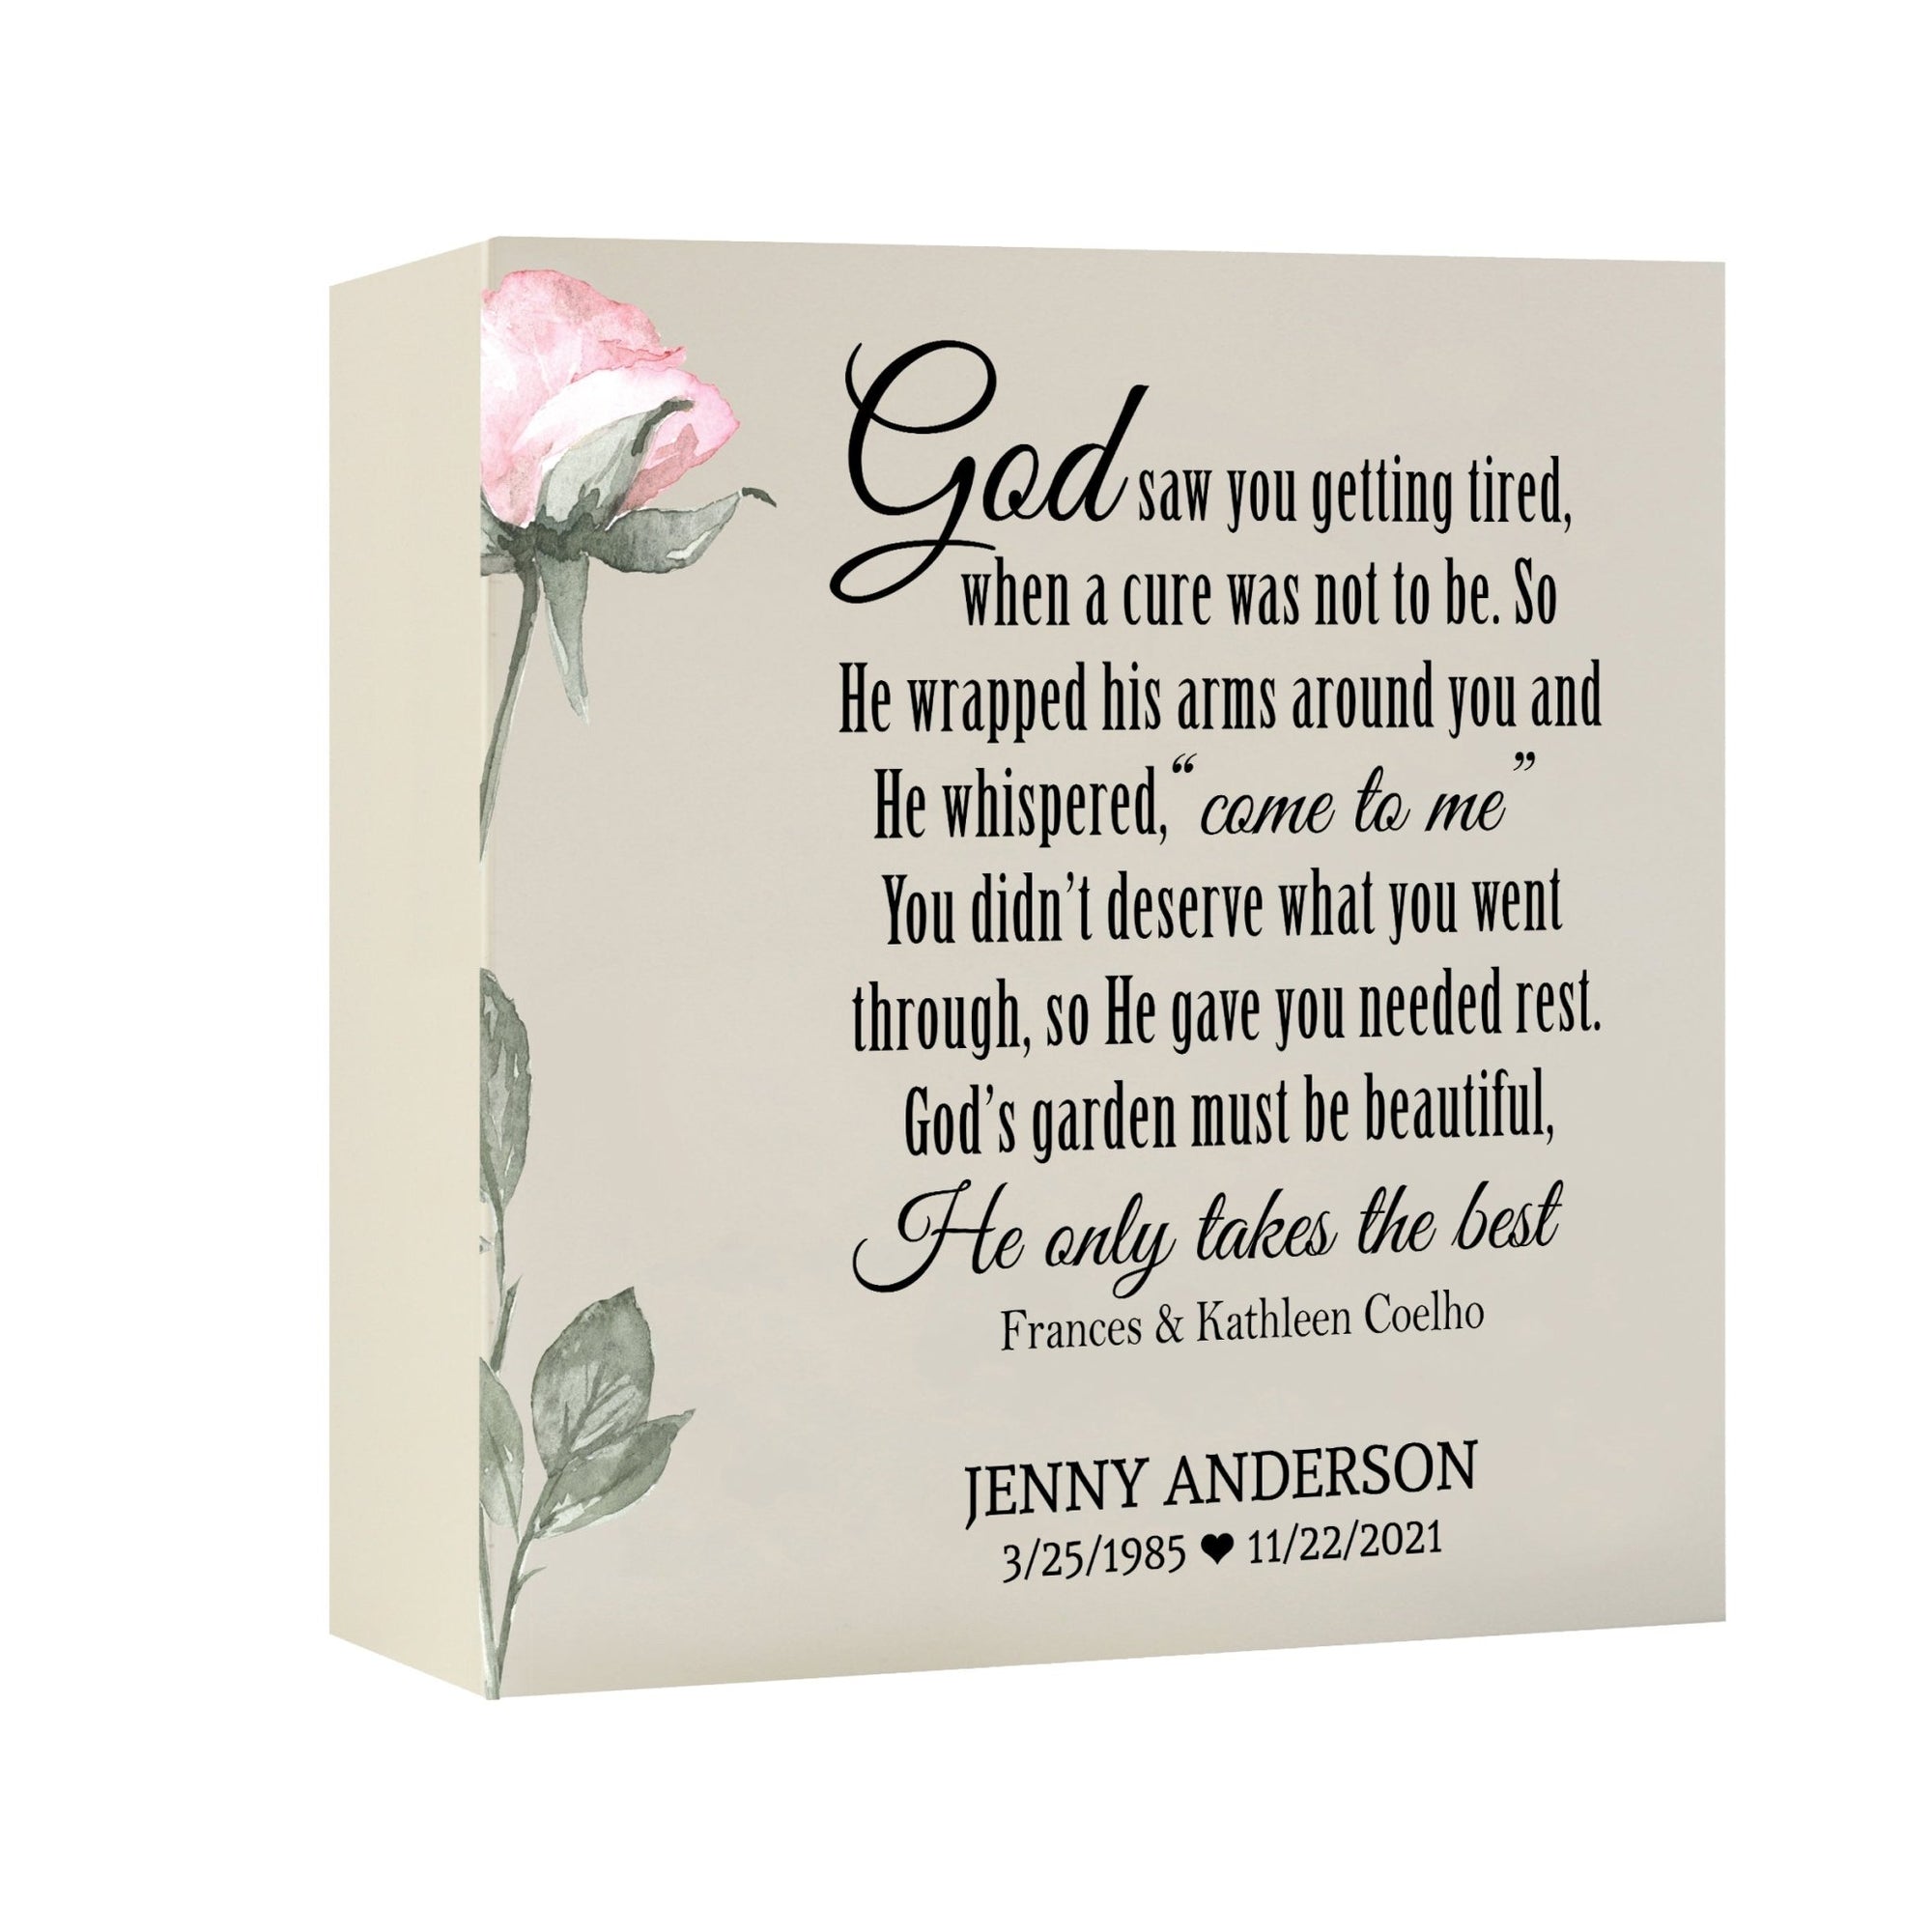 Timeless Human Memorial Shadow Box Urn With Inspirational Verse in Ivory - God Saw You - LifeSong Milestones